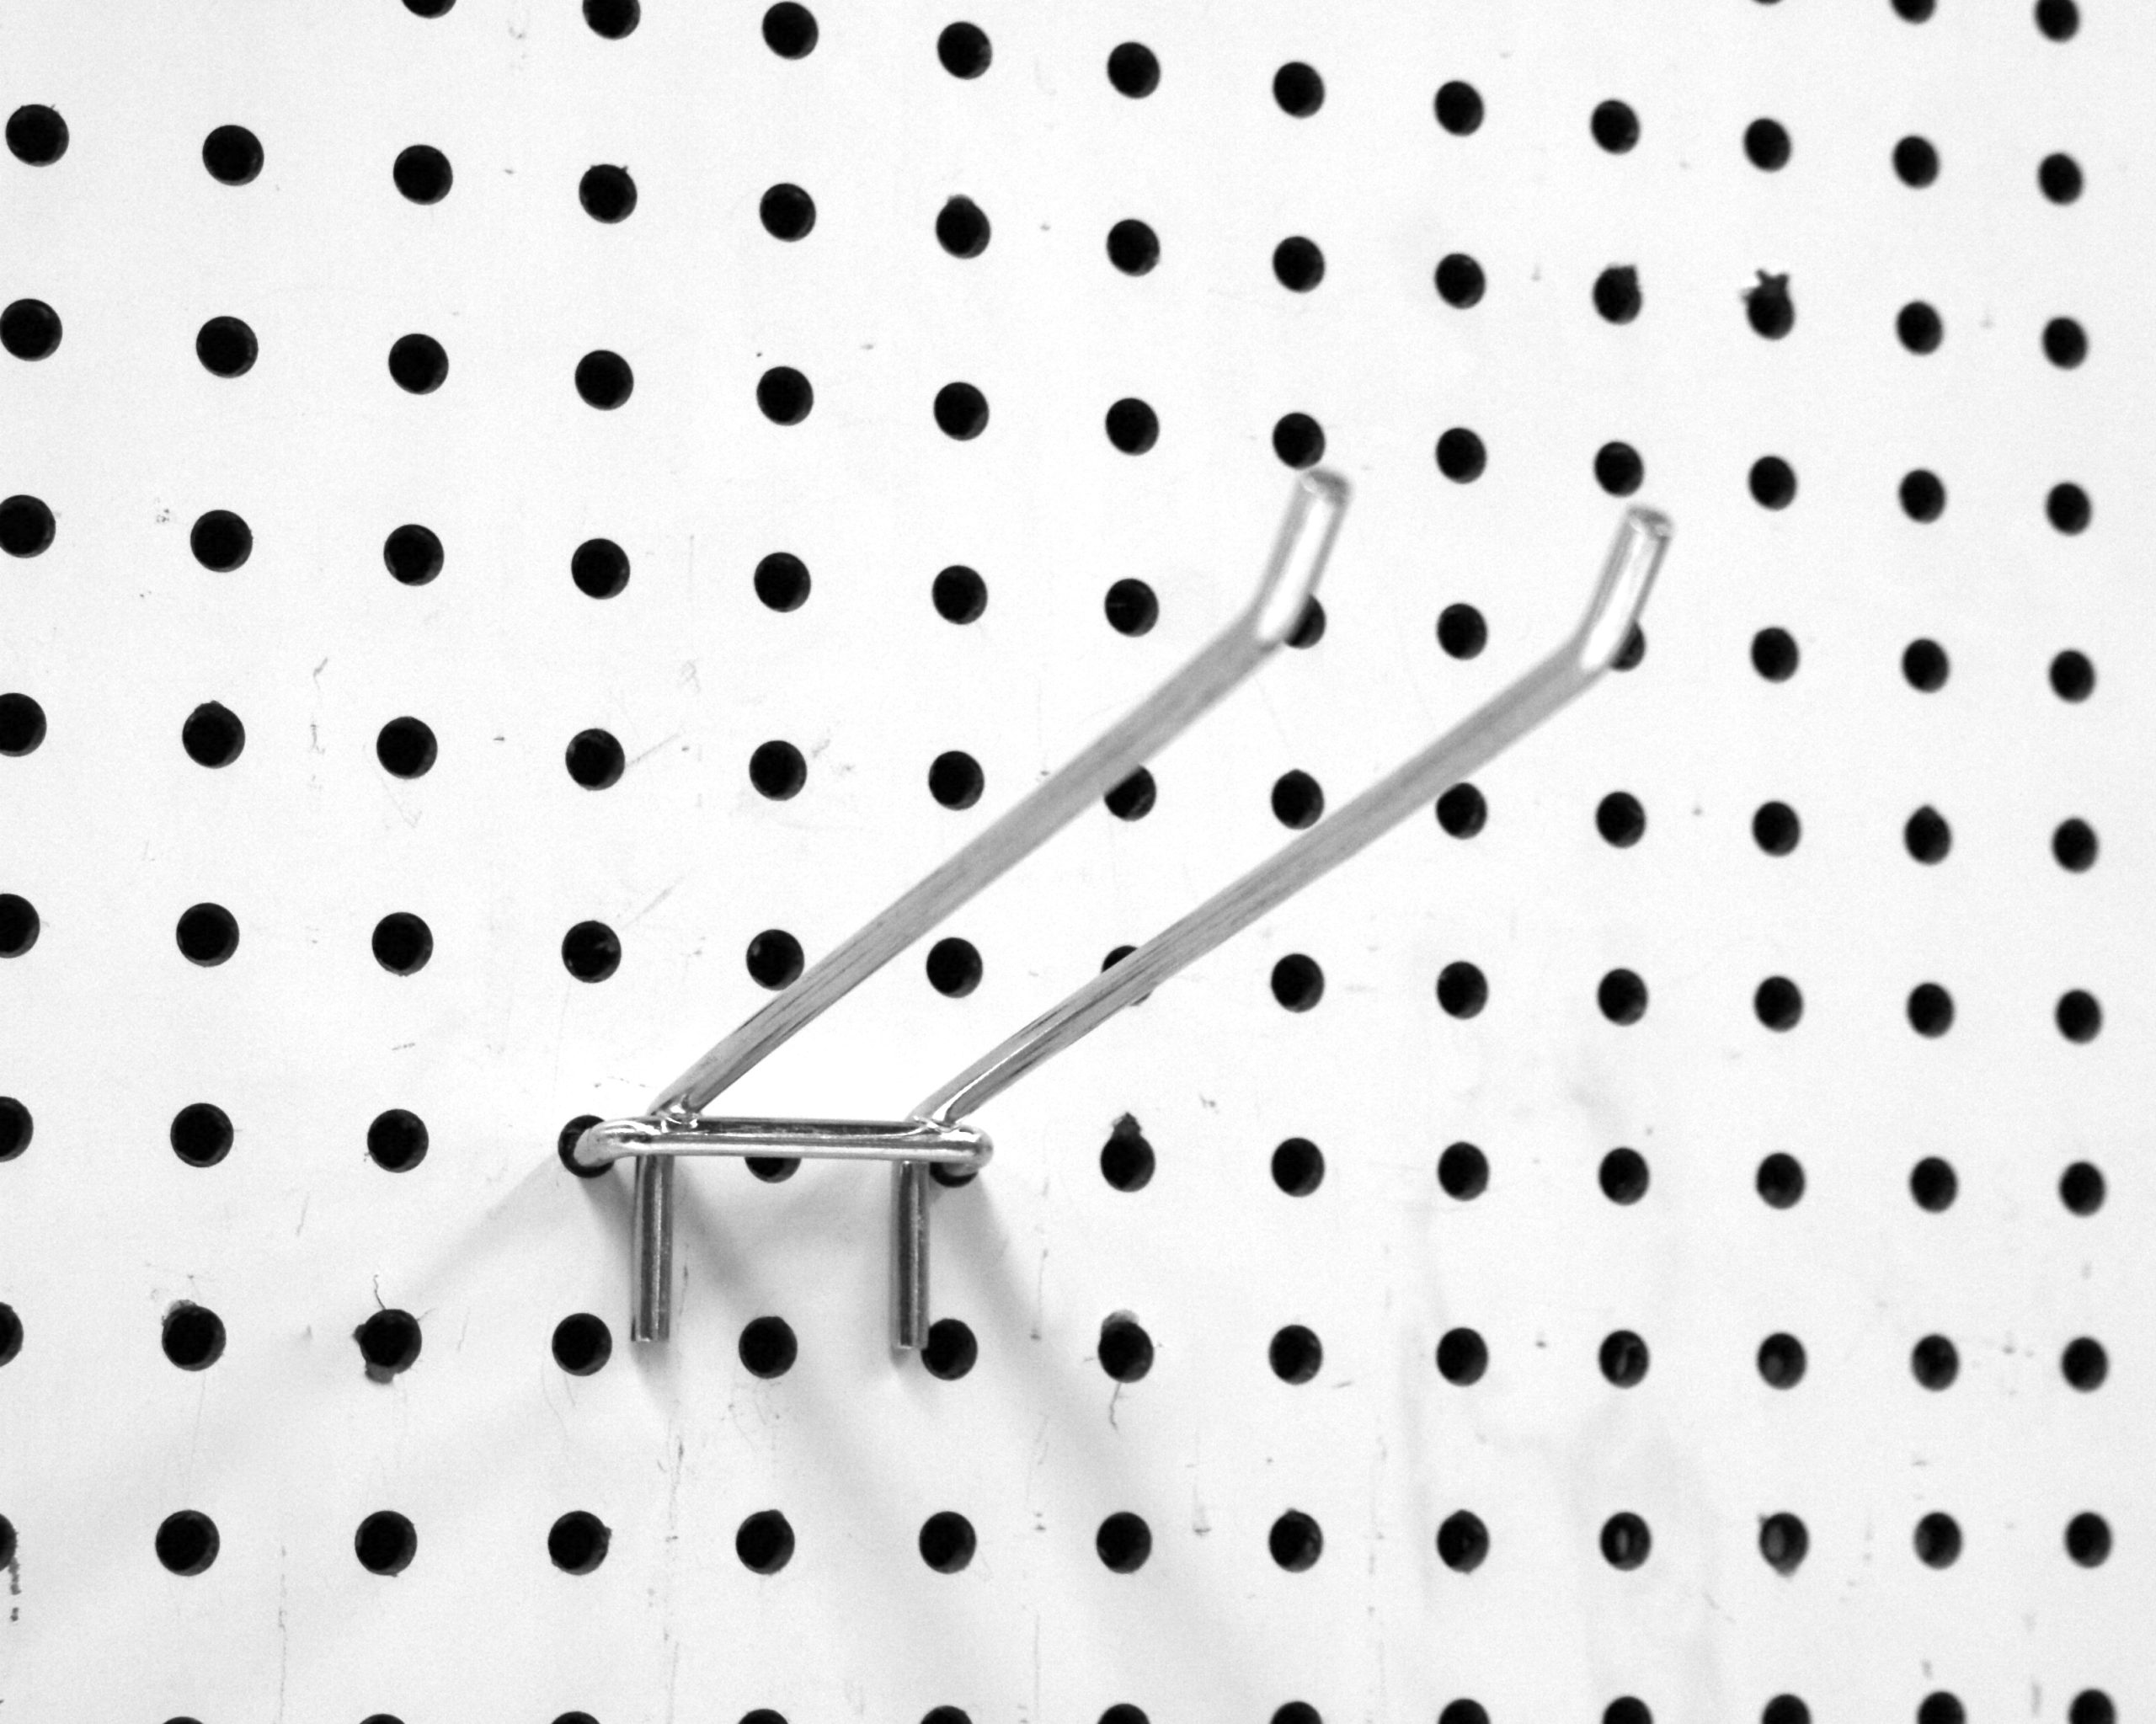 Pegboard hook 4 long - 1/4 wire- ball end with plastic back - zinc/white